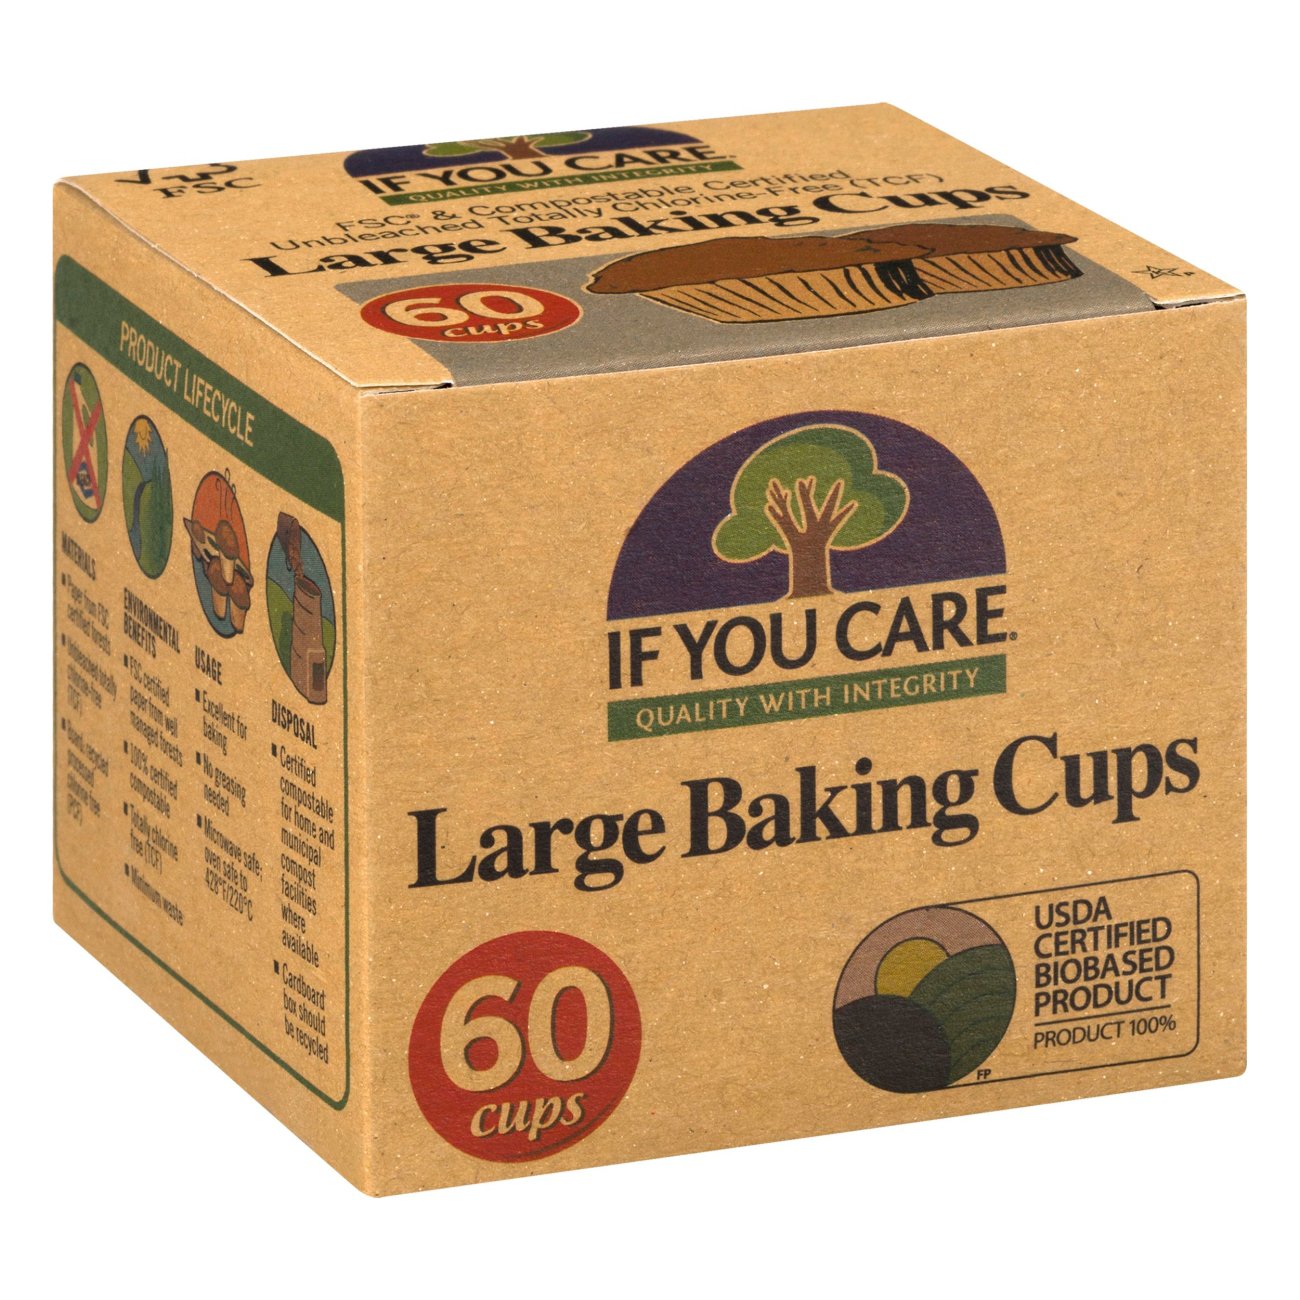 If You Care Large Baking Cups 24 X 1 X 60